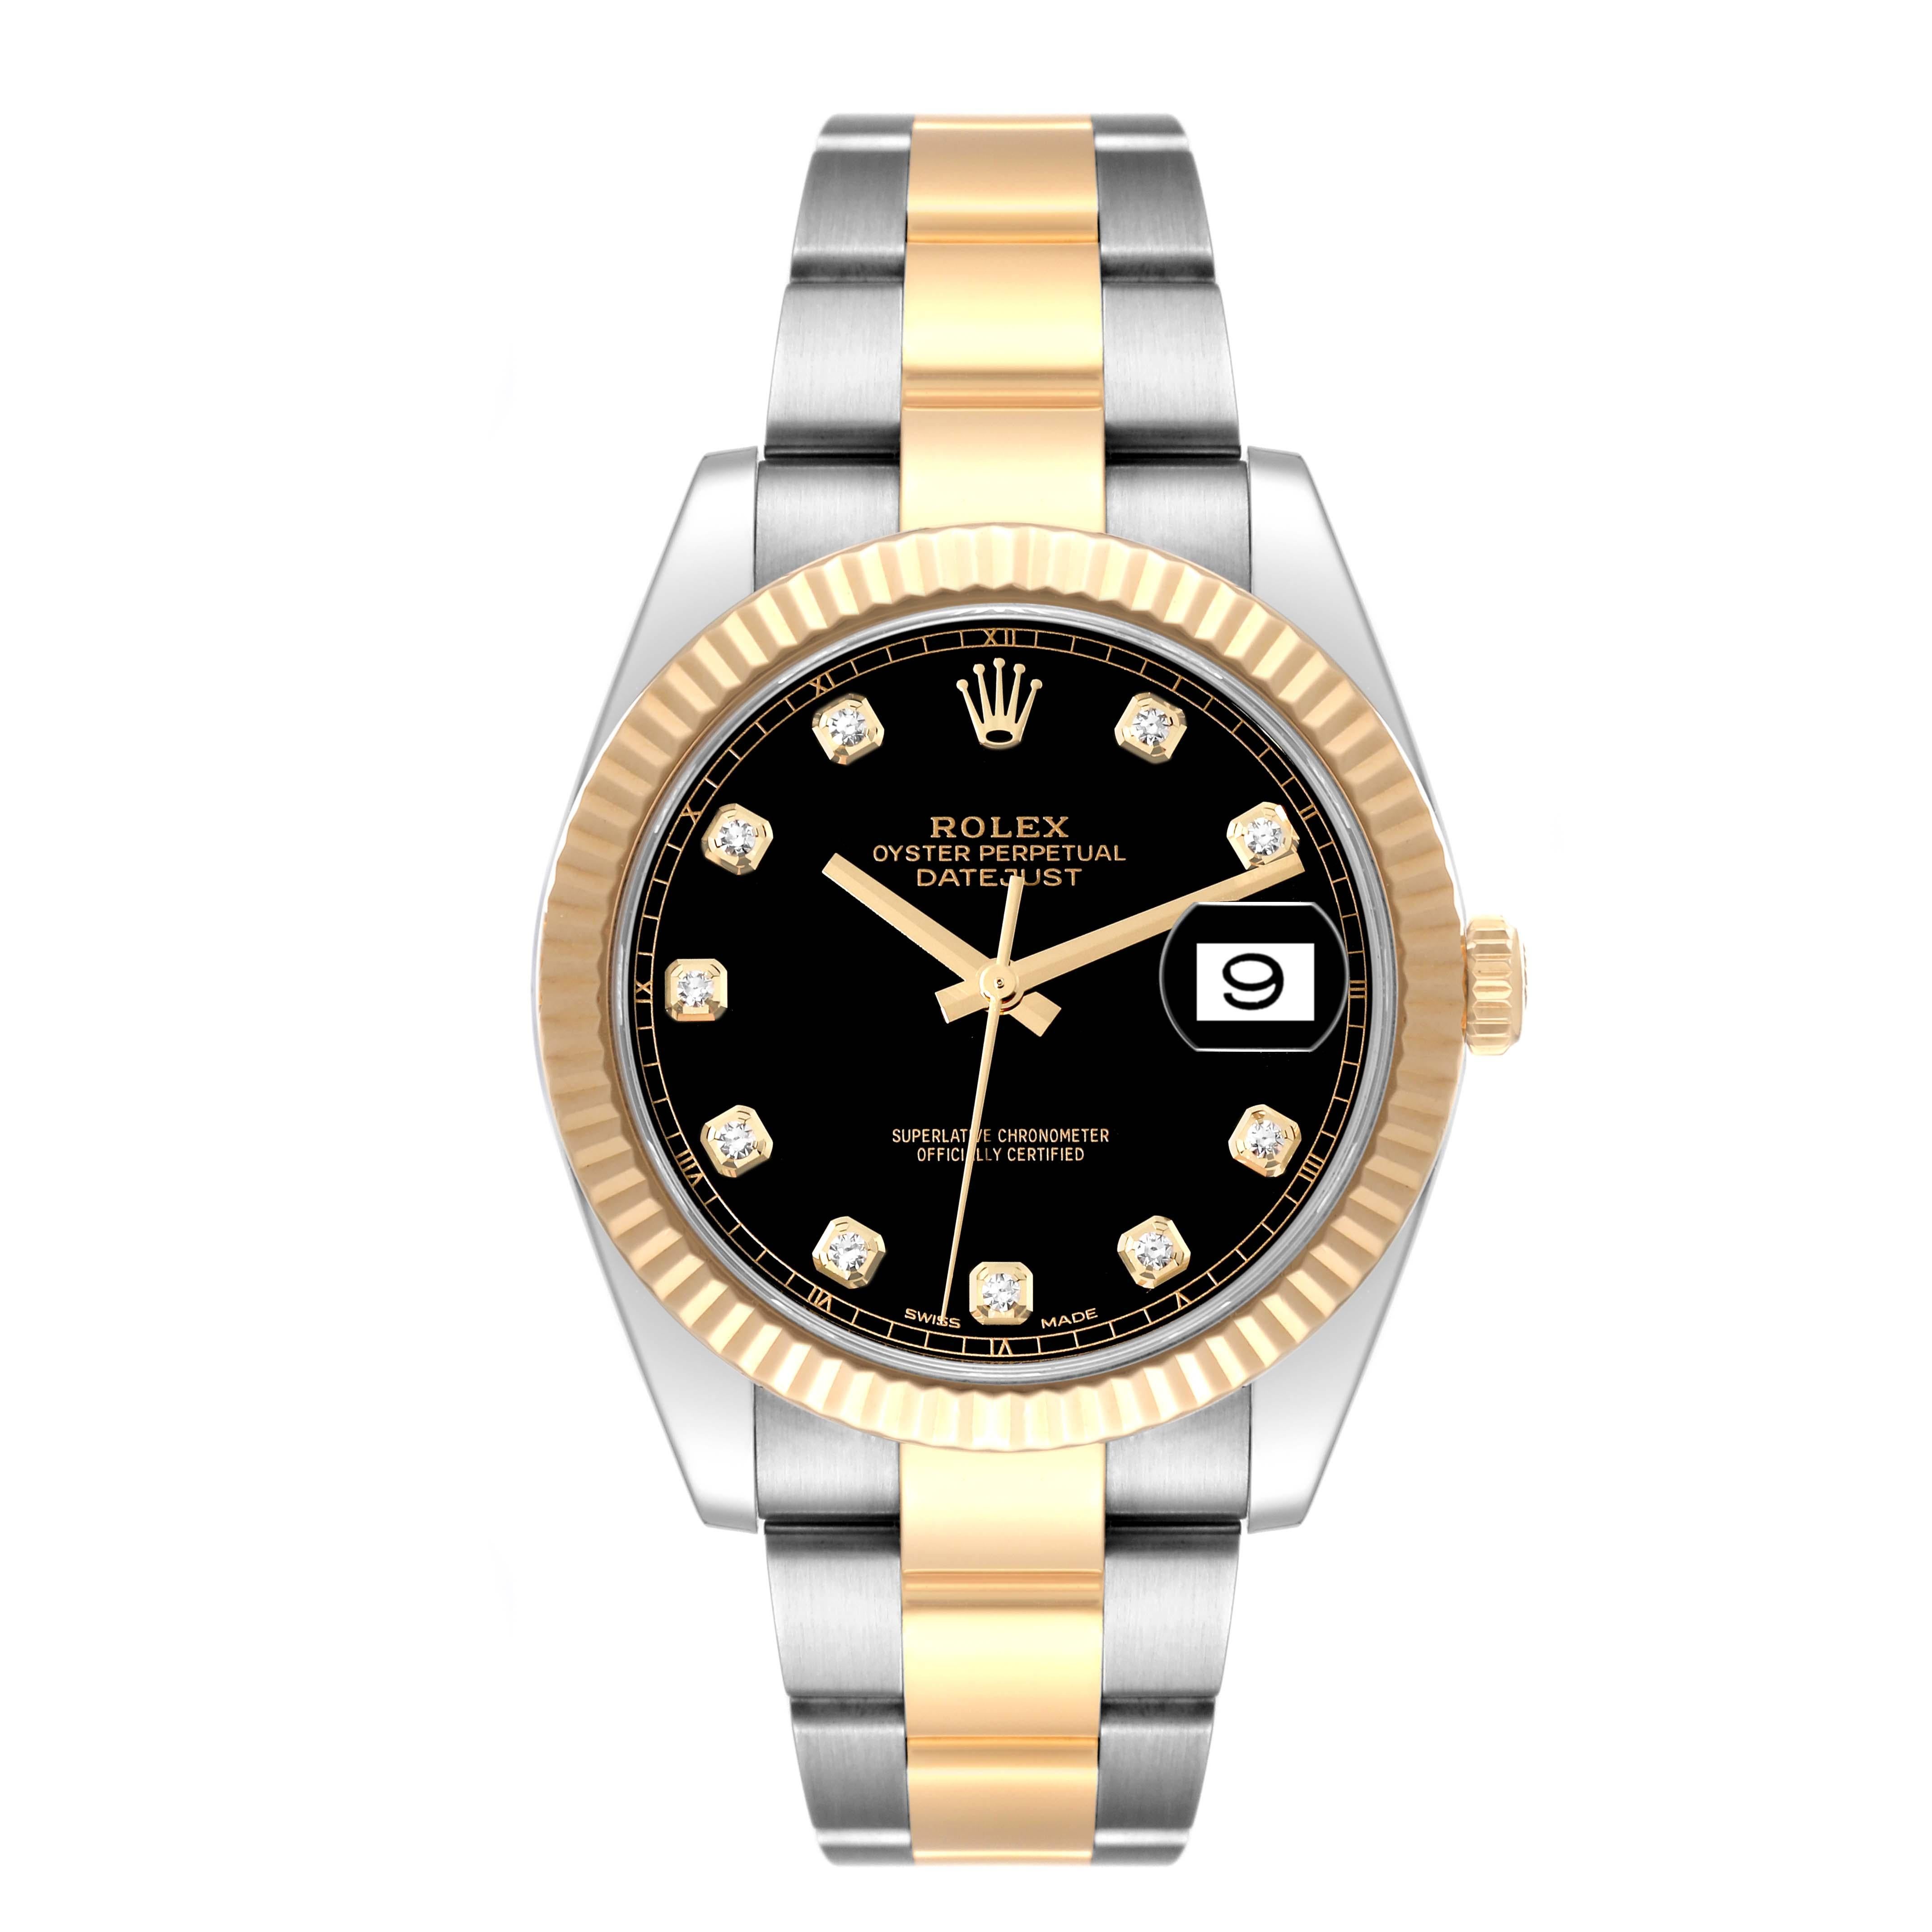 Rolex Datejust 41 Steel Yellow Gold Black Diamond Dial Mens Watch 126333. Officially certified chronometer automatic self-winding movement. Stainless steel and 18K yellow gold case 41.0 mm in diameter. Rolex logo on a crown. 18K yellow gold fluted